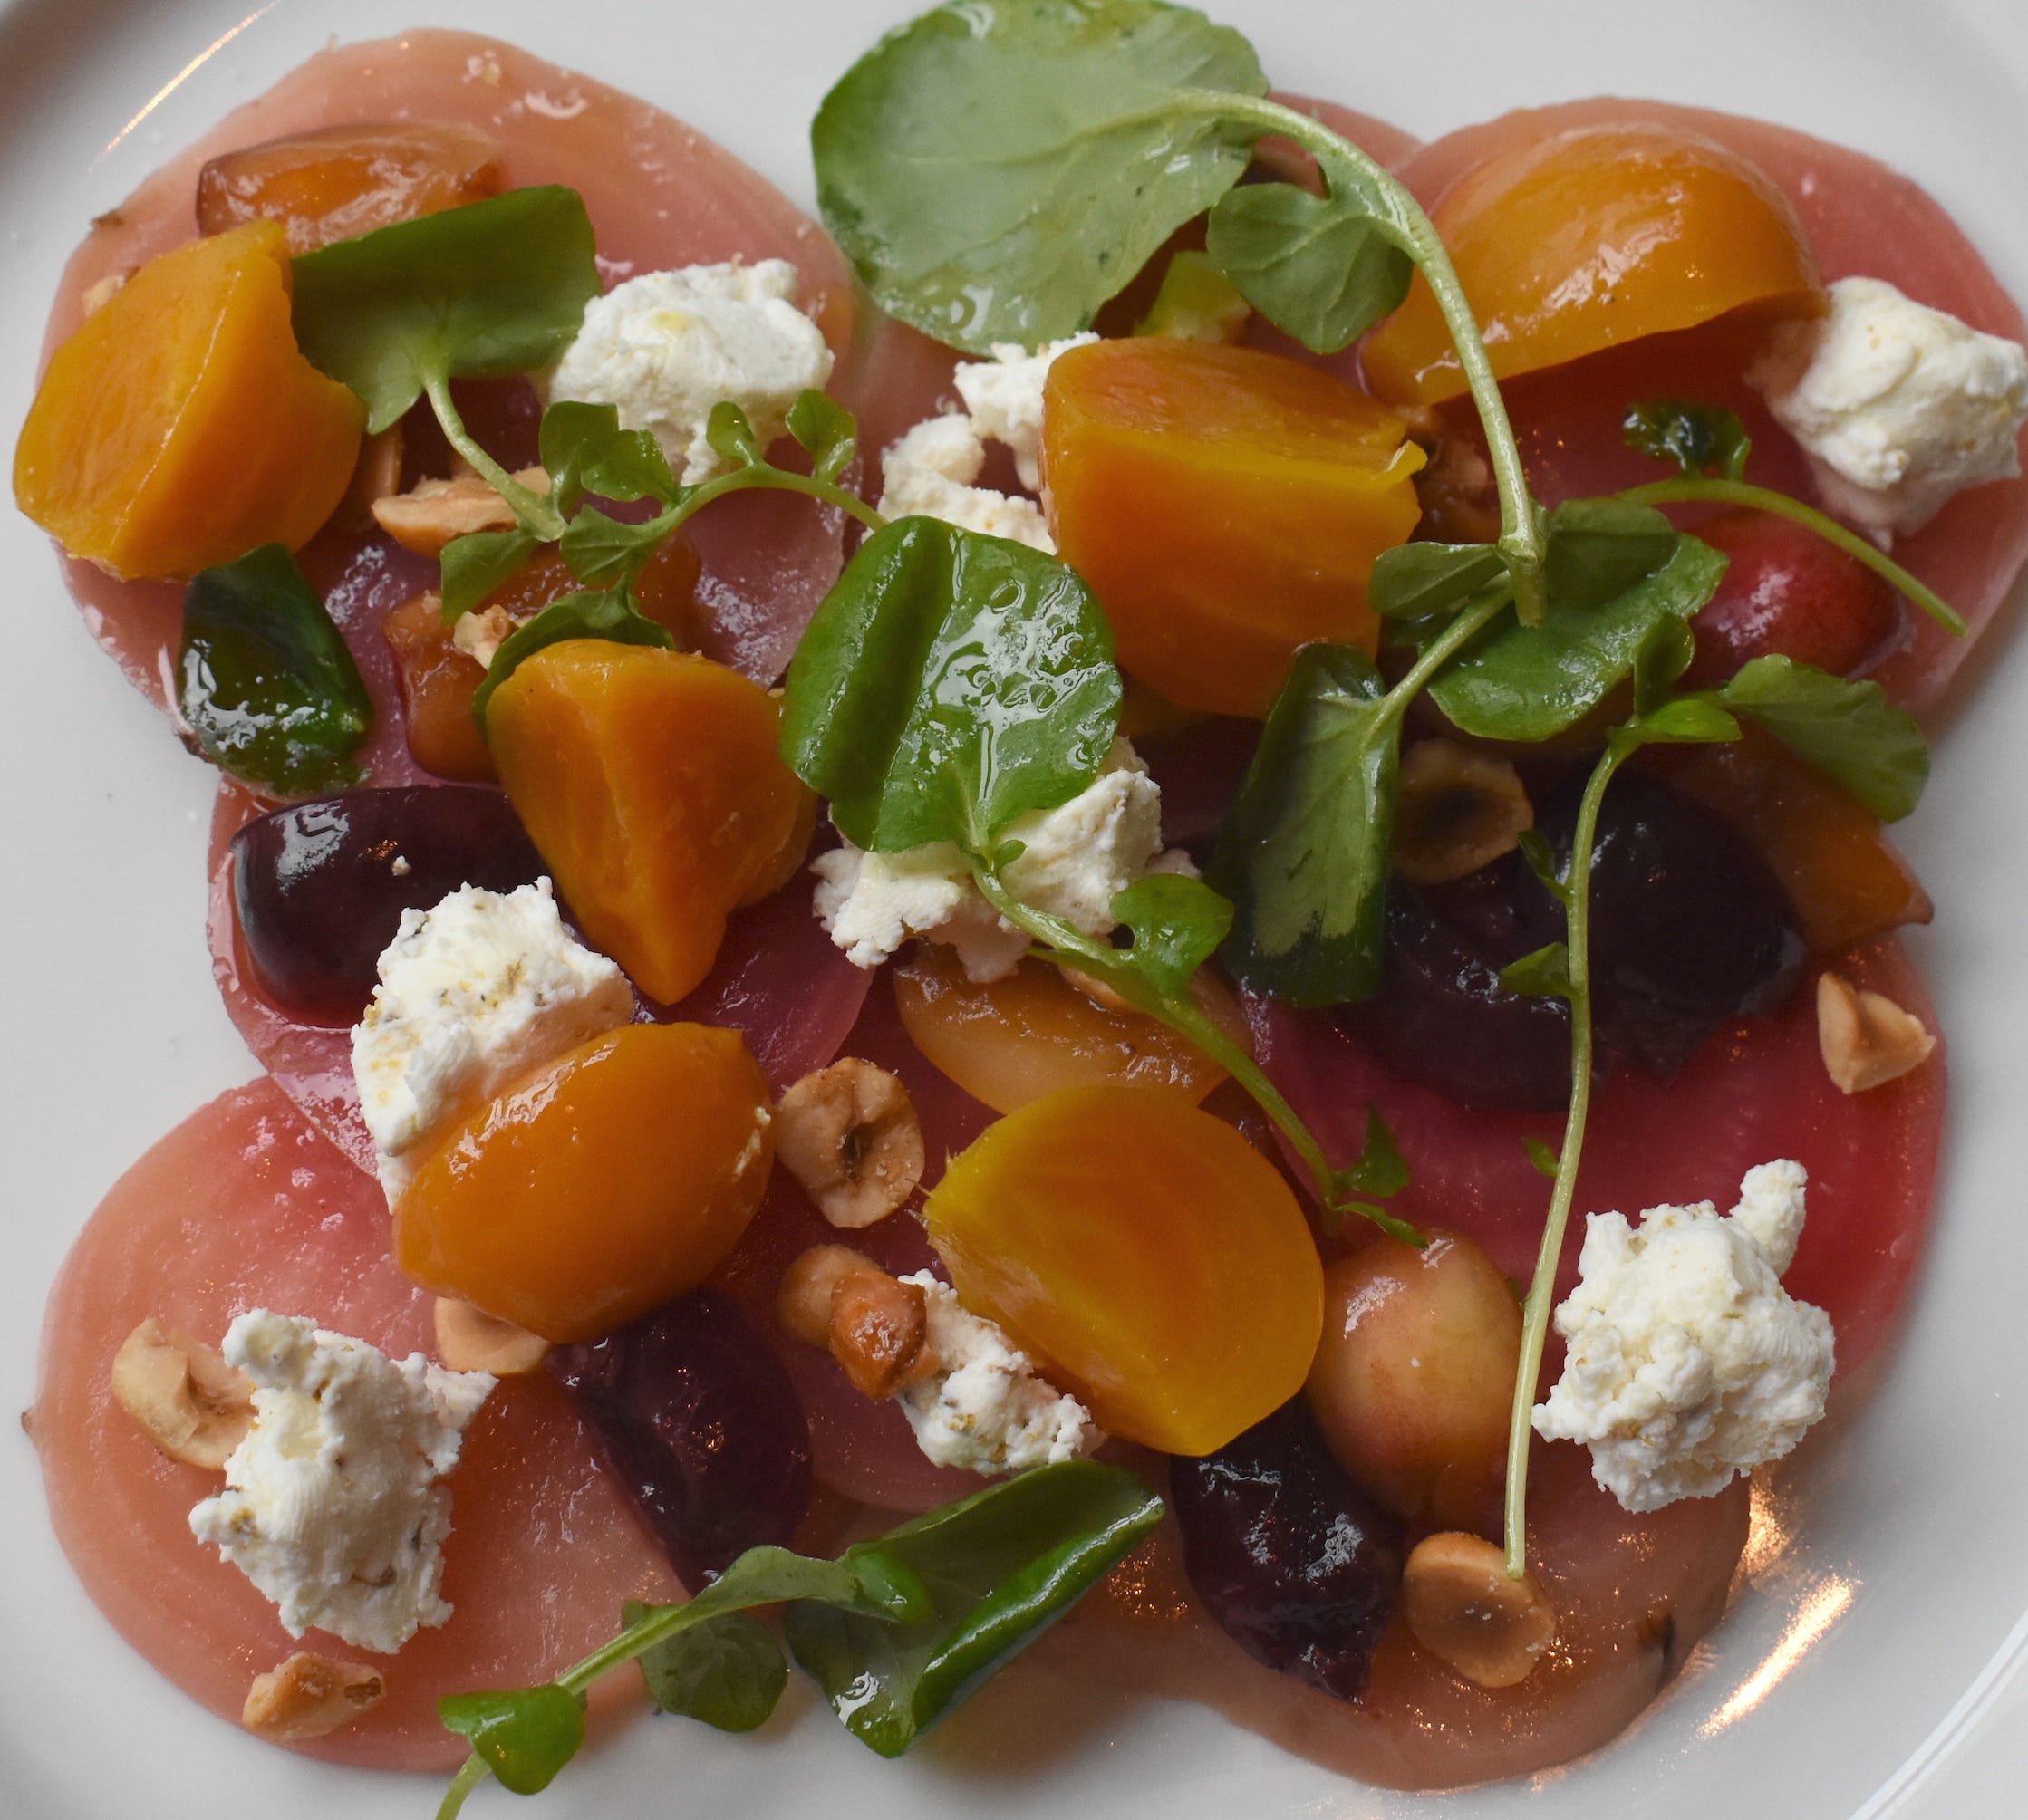 A beet carpaccio antipasti is complimented by Idyll Farms goat cheese, hazelnuts and pickled cherries.